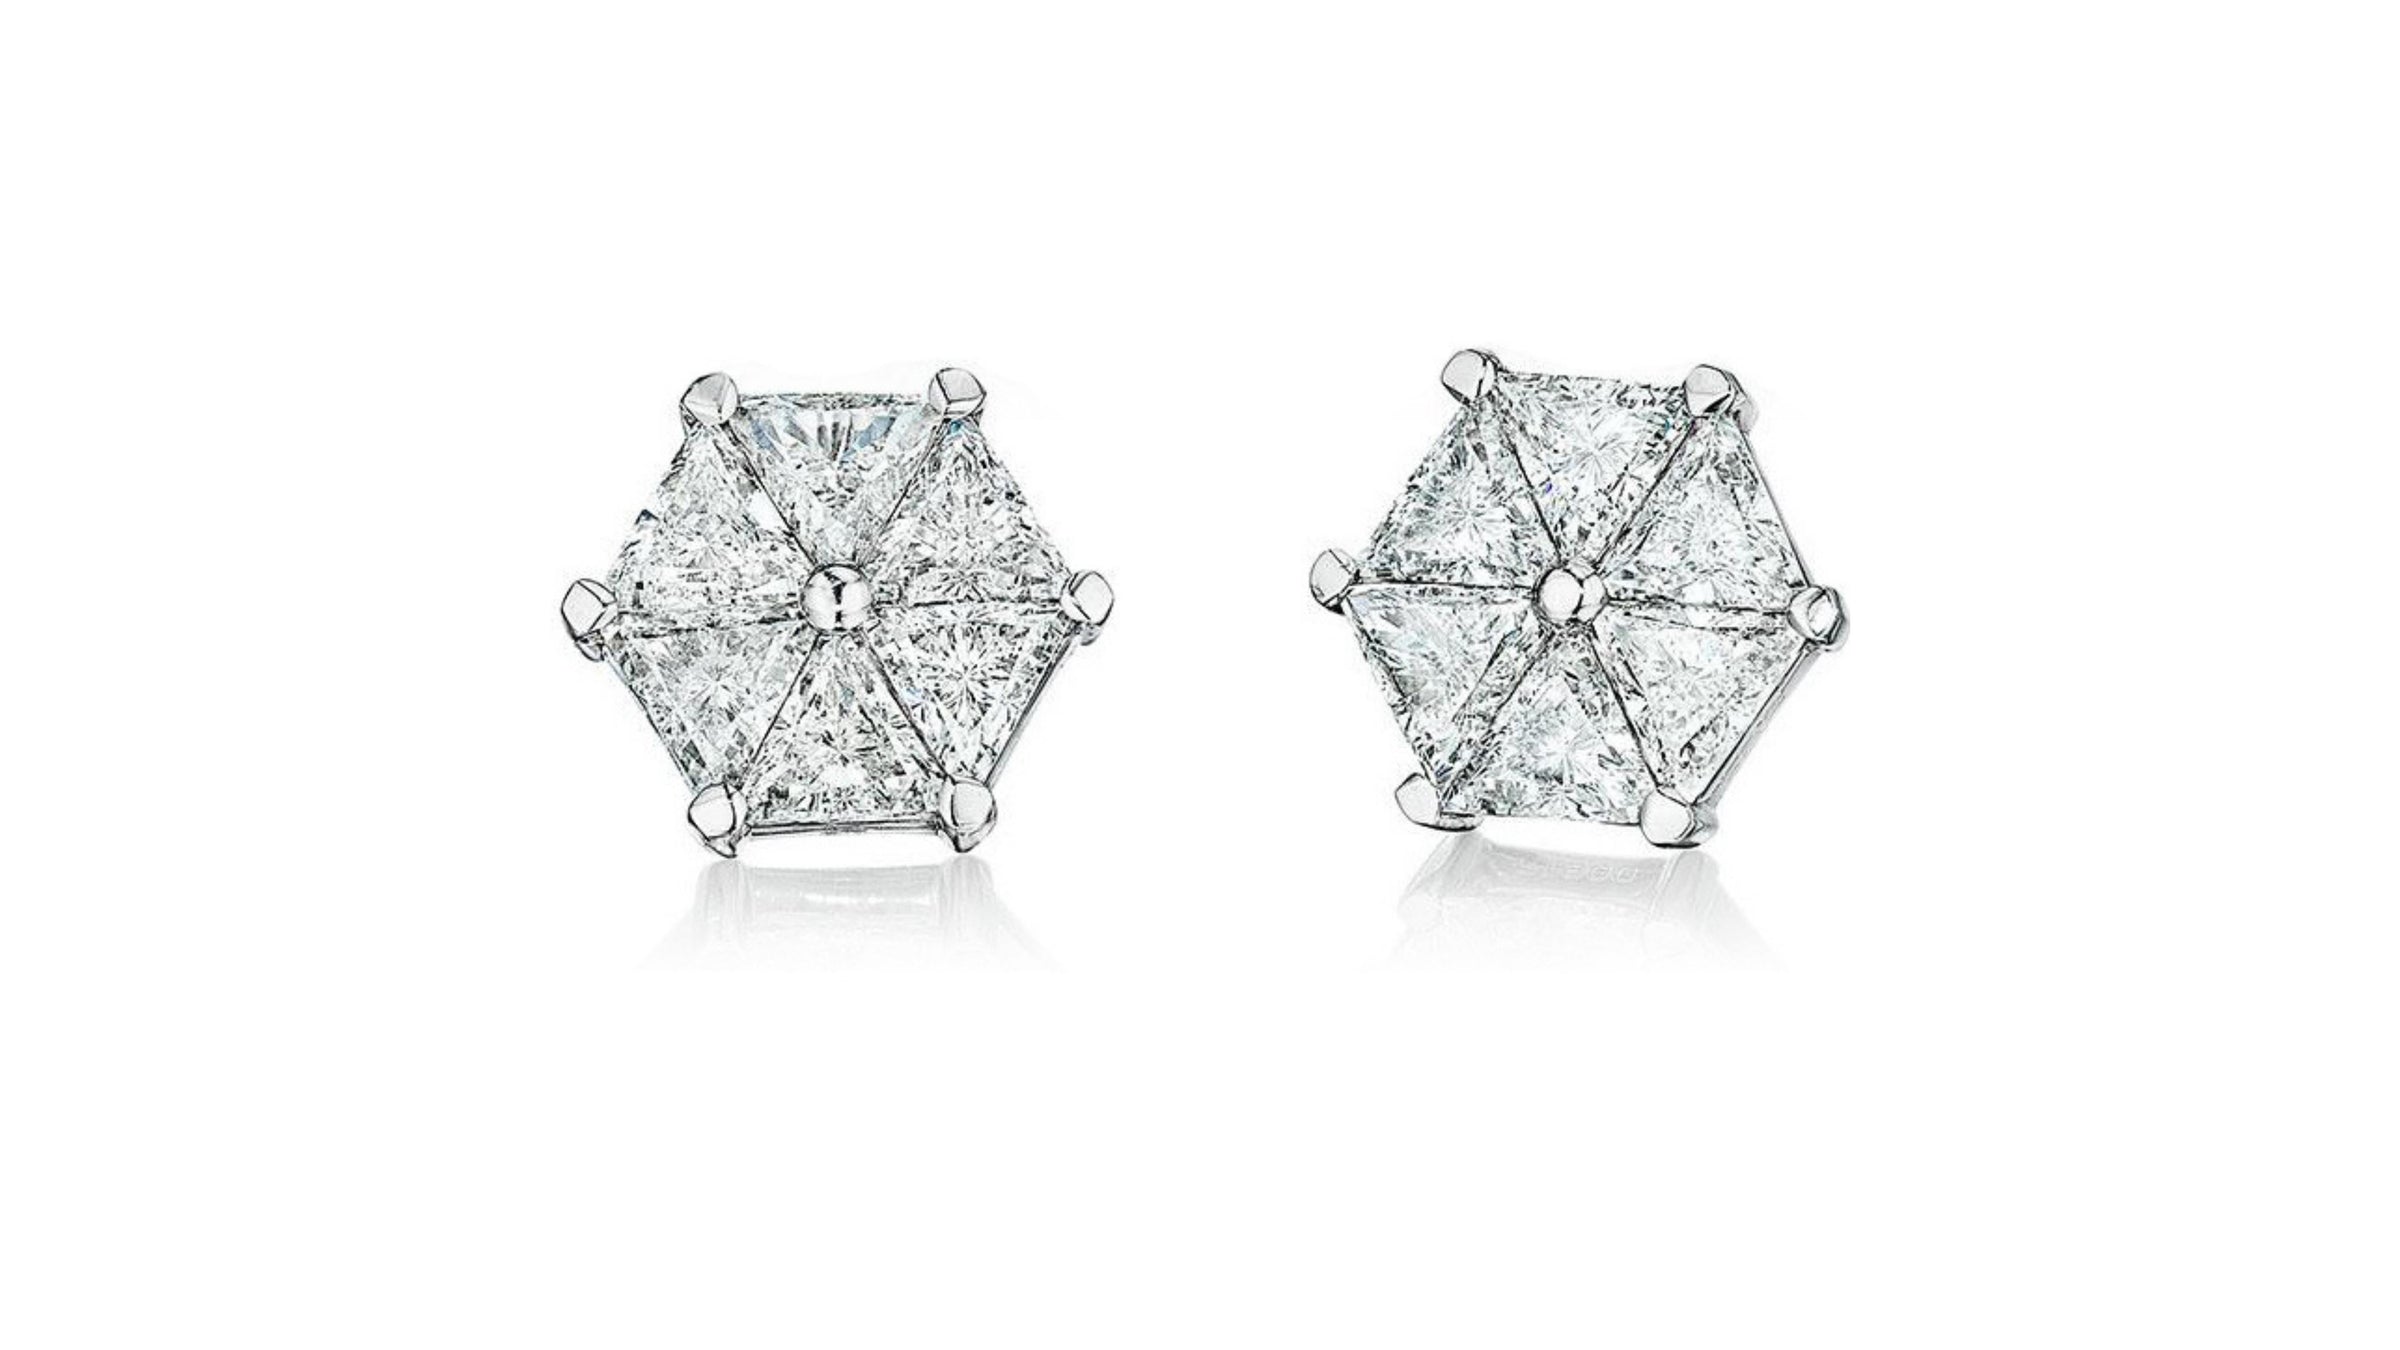 Six perfectly matched trilliant diamonds  in earrings handcrafted by Chicago jeweler, Lester Lampert.